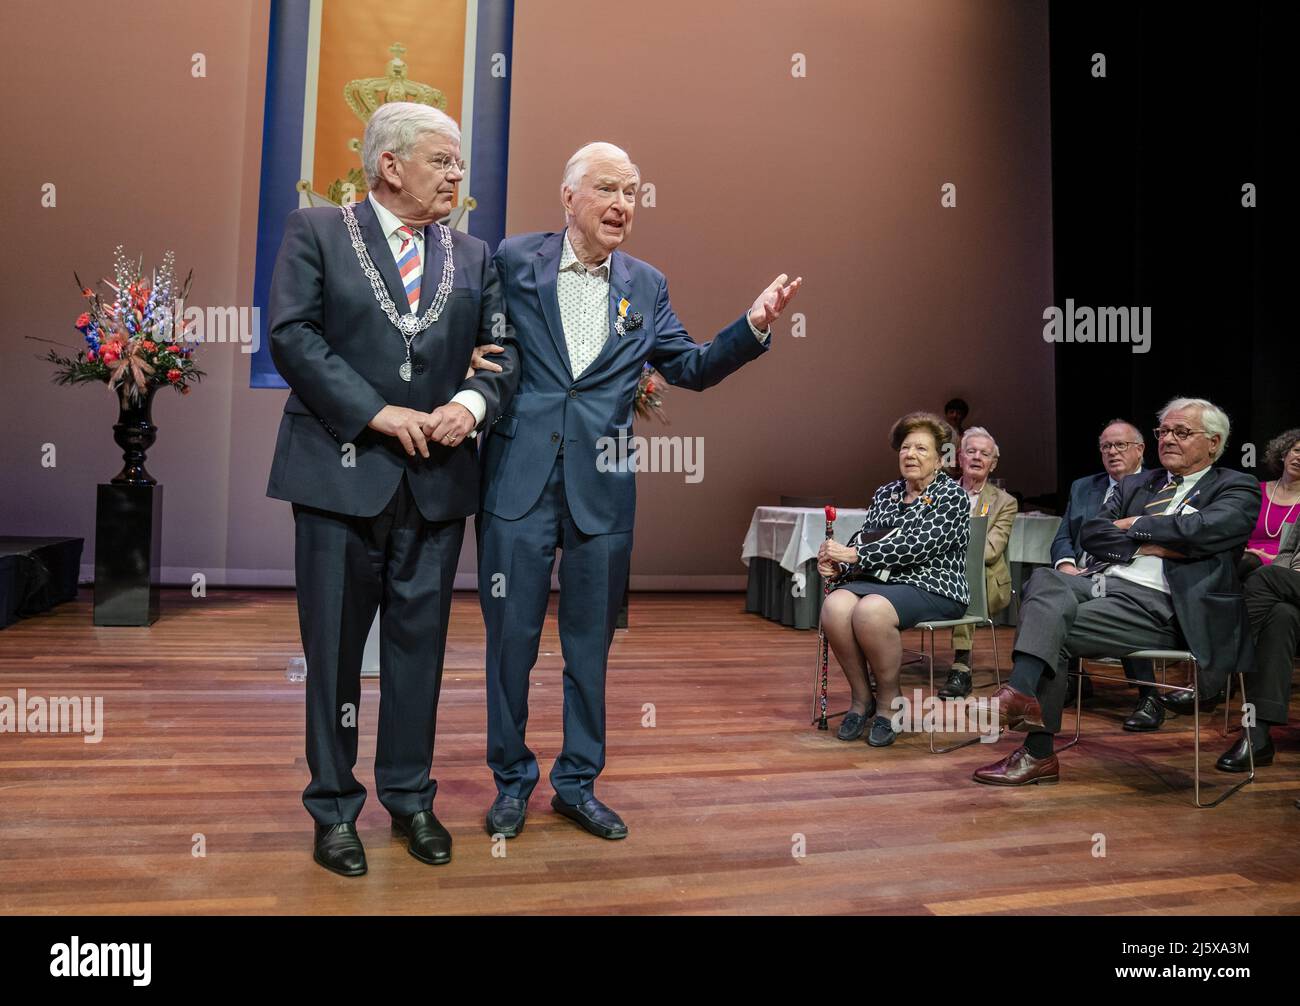 THE HAGUE - the Netherlands, 2022-04-26 12:25:53 THE HAGUE - Former  journalist and theater producer Henk van der Meijden receives a royal award  from mayor Jan van Zanen during the annual ribbon